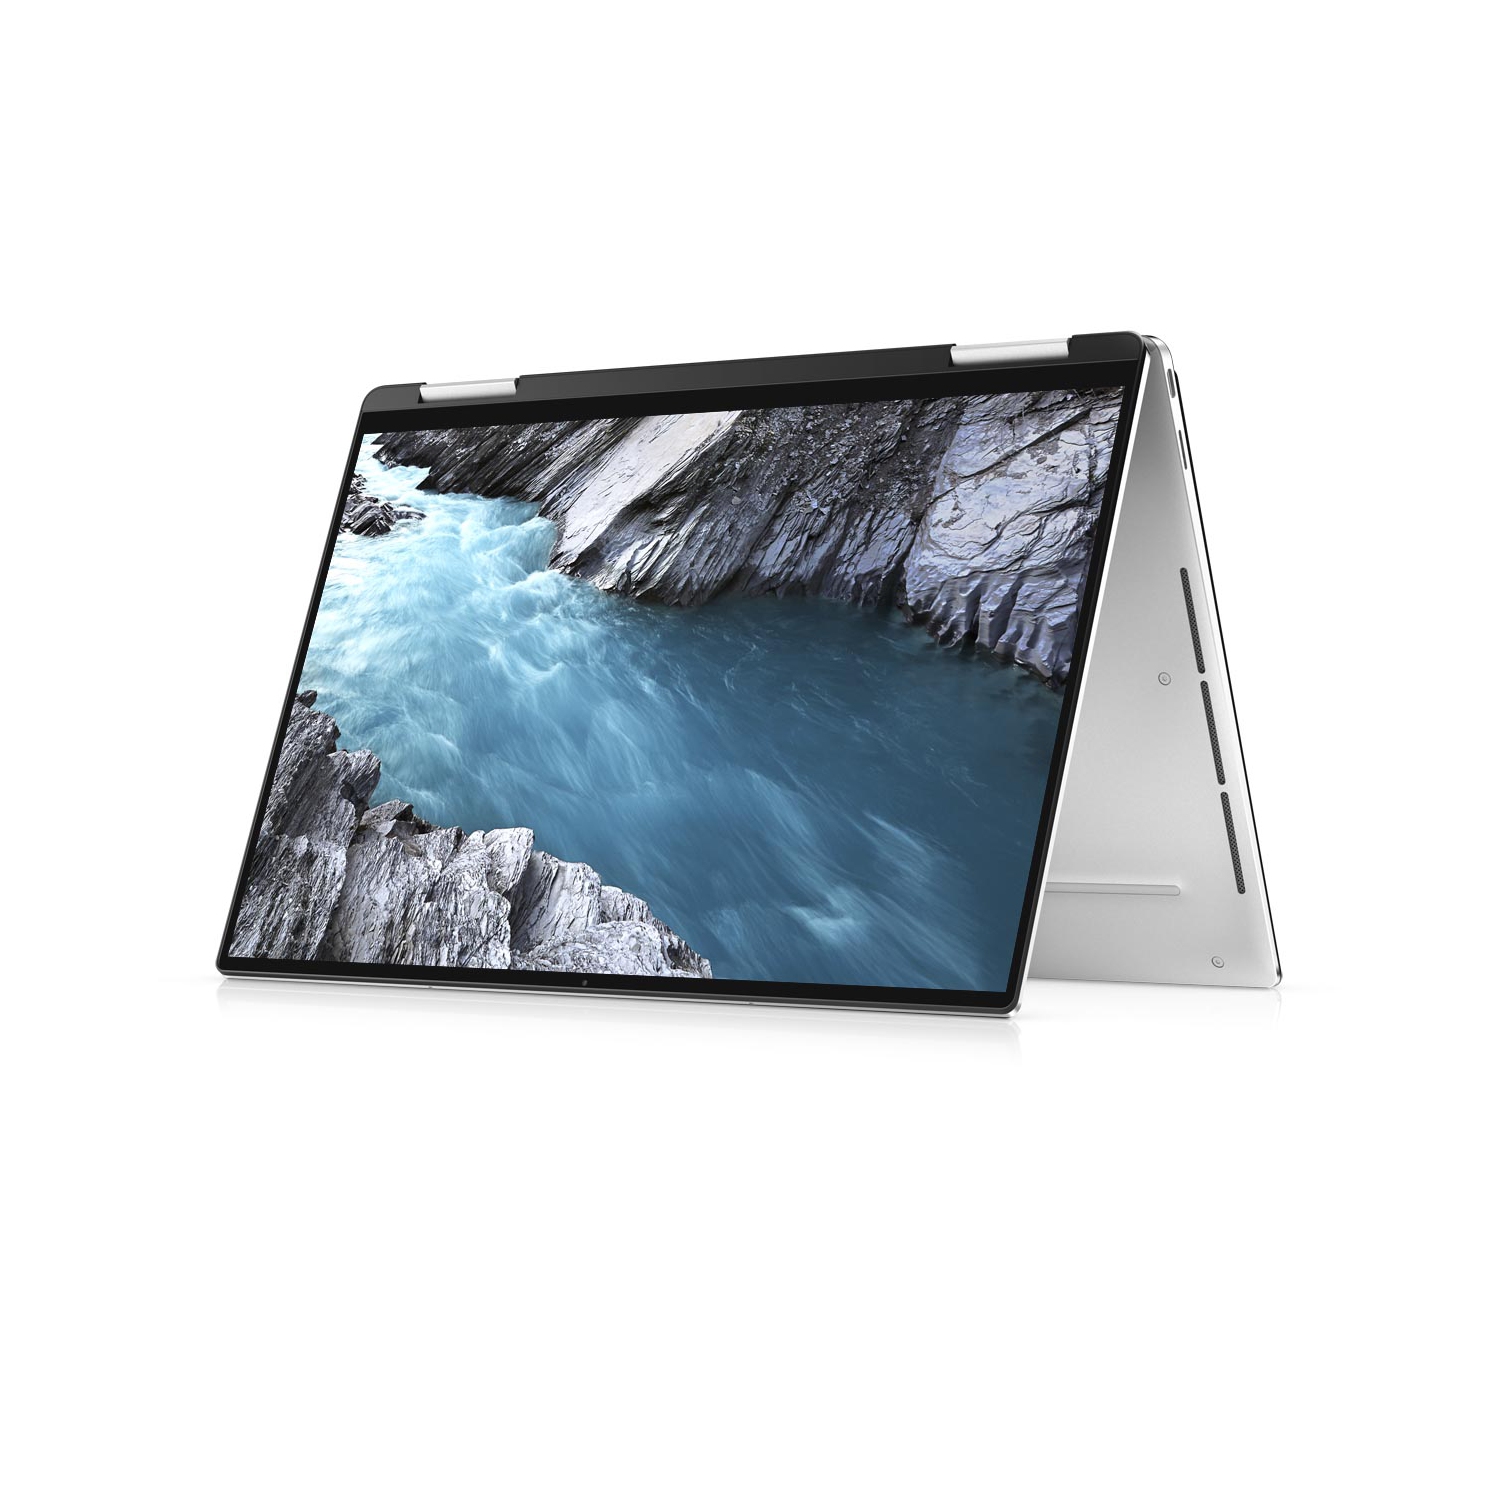 Refurbished (Excellent) - Dell XPS 13 7390 2-in-1 (2019) | 13.4" FHD+ Touch | Core i3 - 256GB SSD - 8GB RAM | 2 Cores @ 3.4 GHz - 10th Gen CPU Certified Refurbished